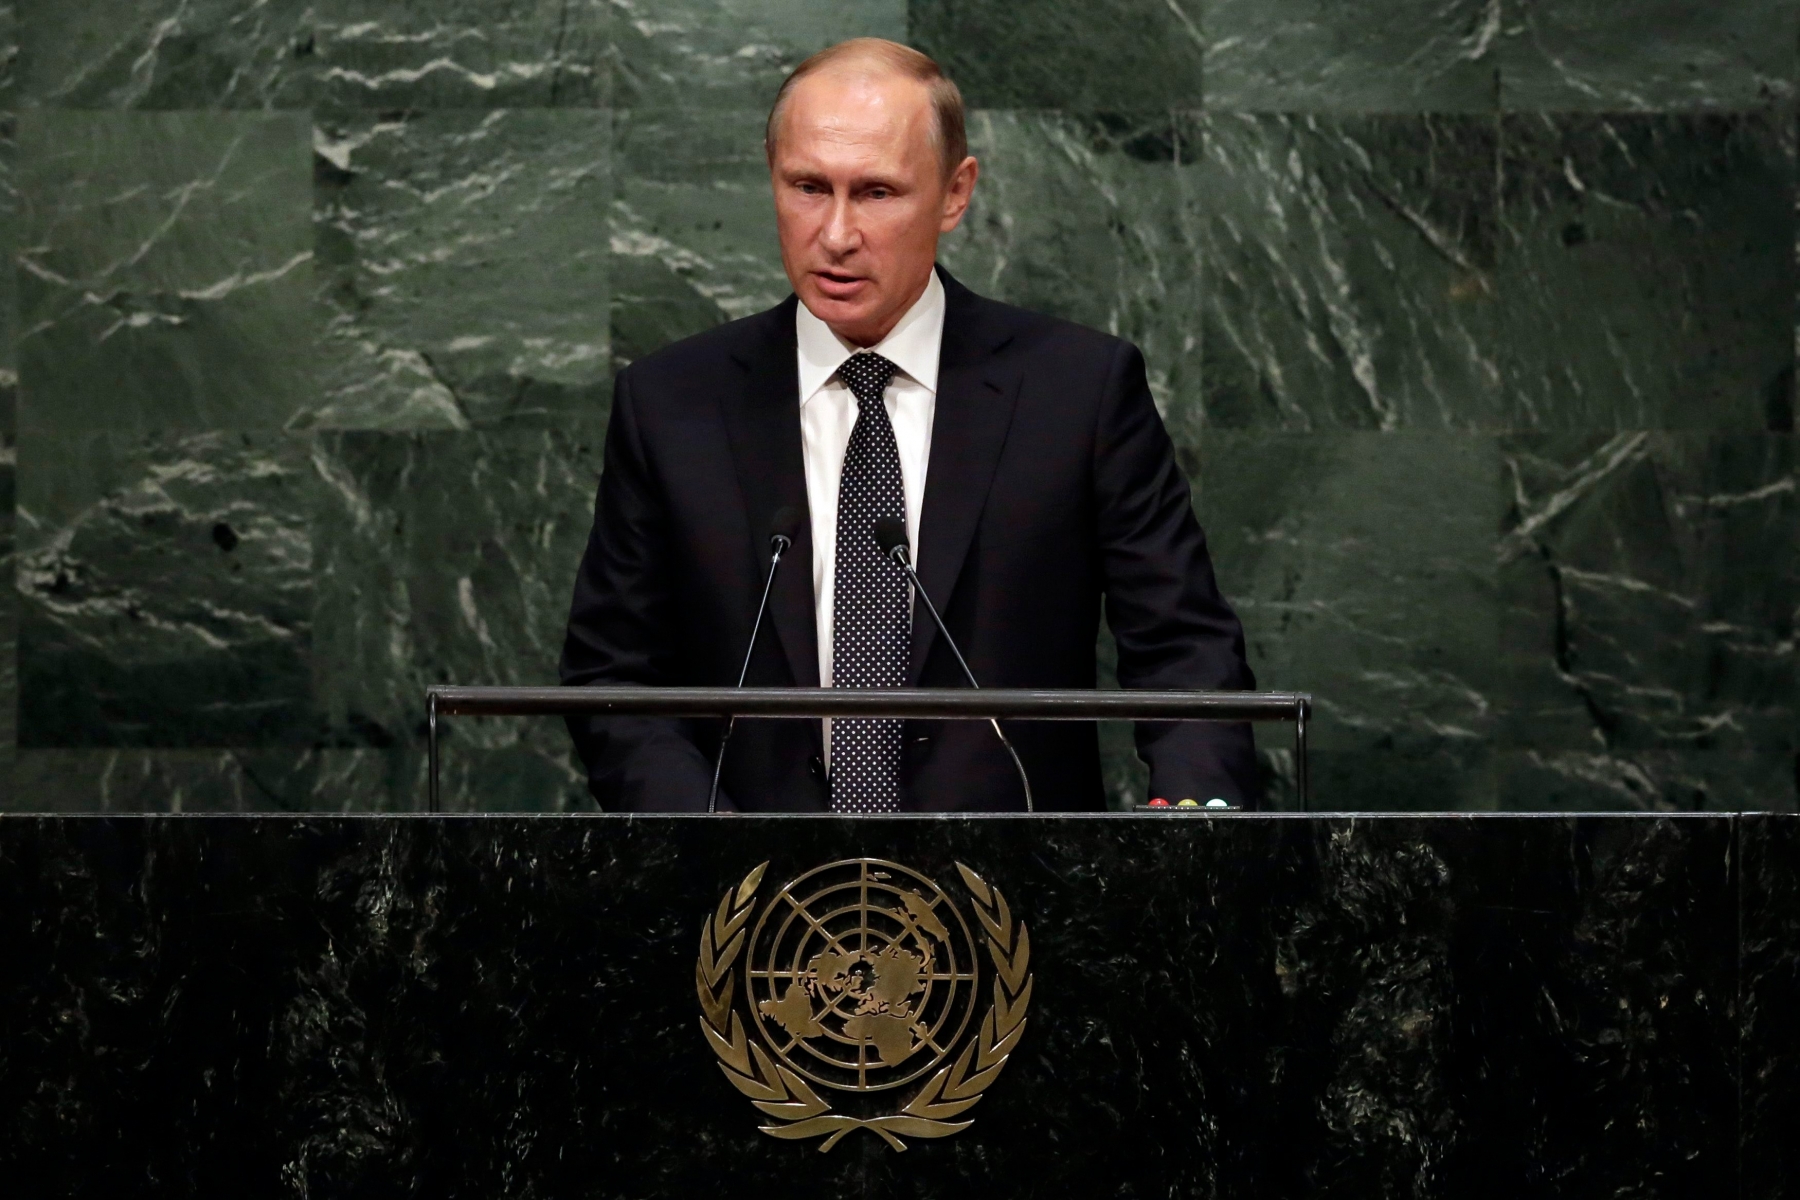 Russia's Vladimir Putin addresses the 70th session of the United Nations General Assembly, Monday, Sept. 28, 2015. (AP Photo/Richard Drew) UN General Assembly